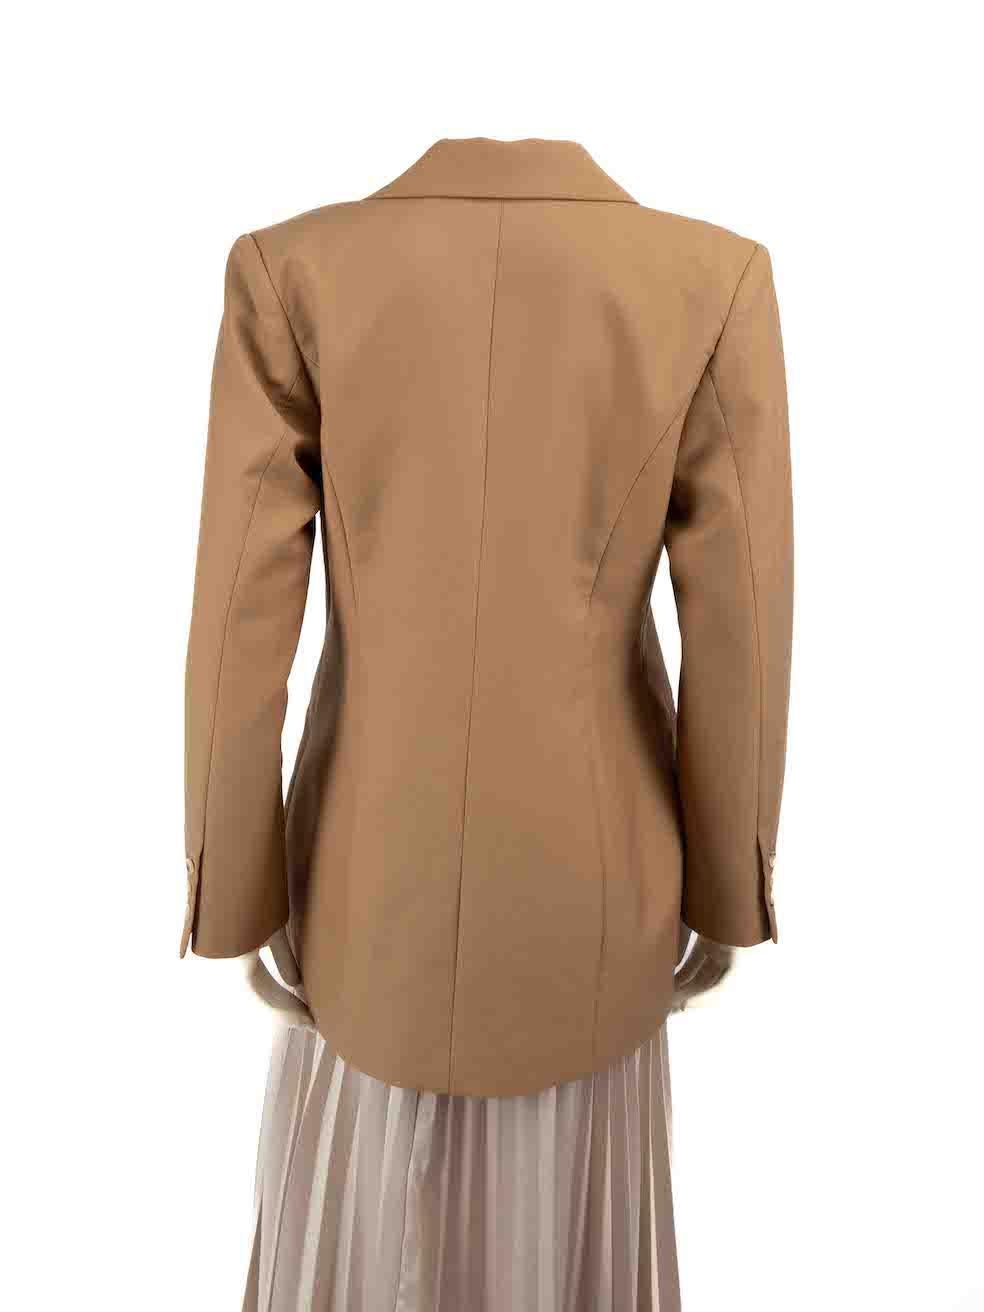 ANNA QUAN Brown Single Breasted Blazer Jacket Size M In Excellent Condition For Sale In London, GB